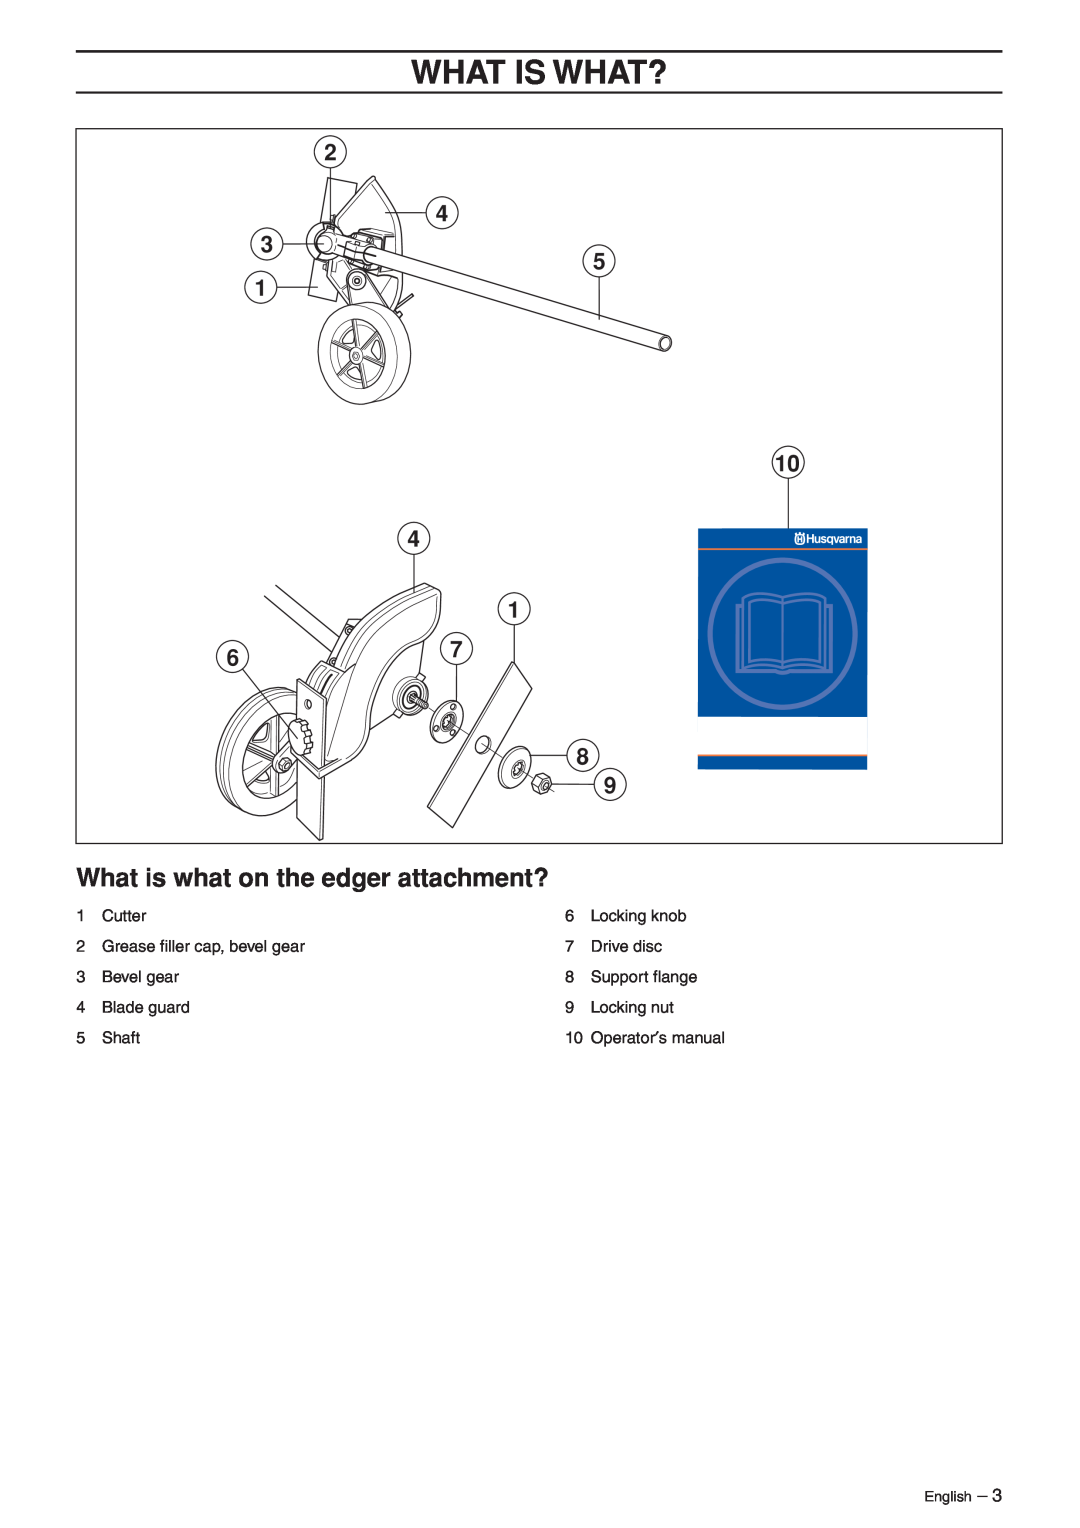 Husqvarna EA 850 manuel dutilisation What Is What?, What is what on the edger attachment? 